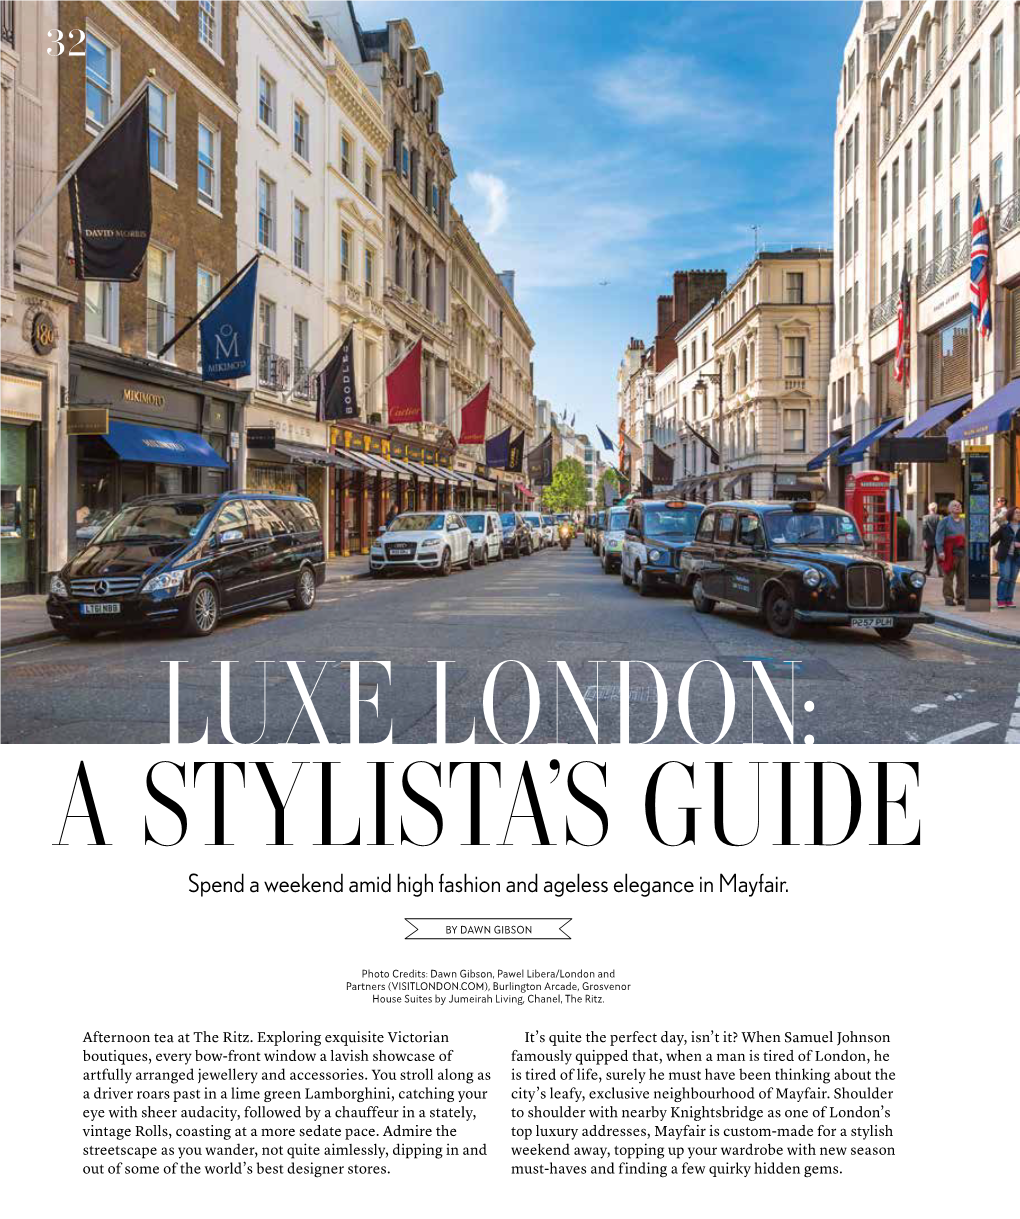 Spend a Weekend Amid High Fashion and Ageless Elegance in Mayfair